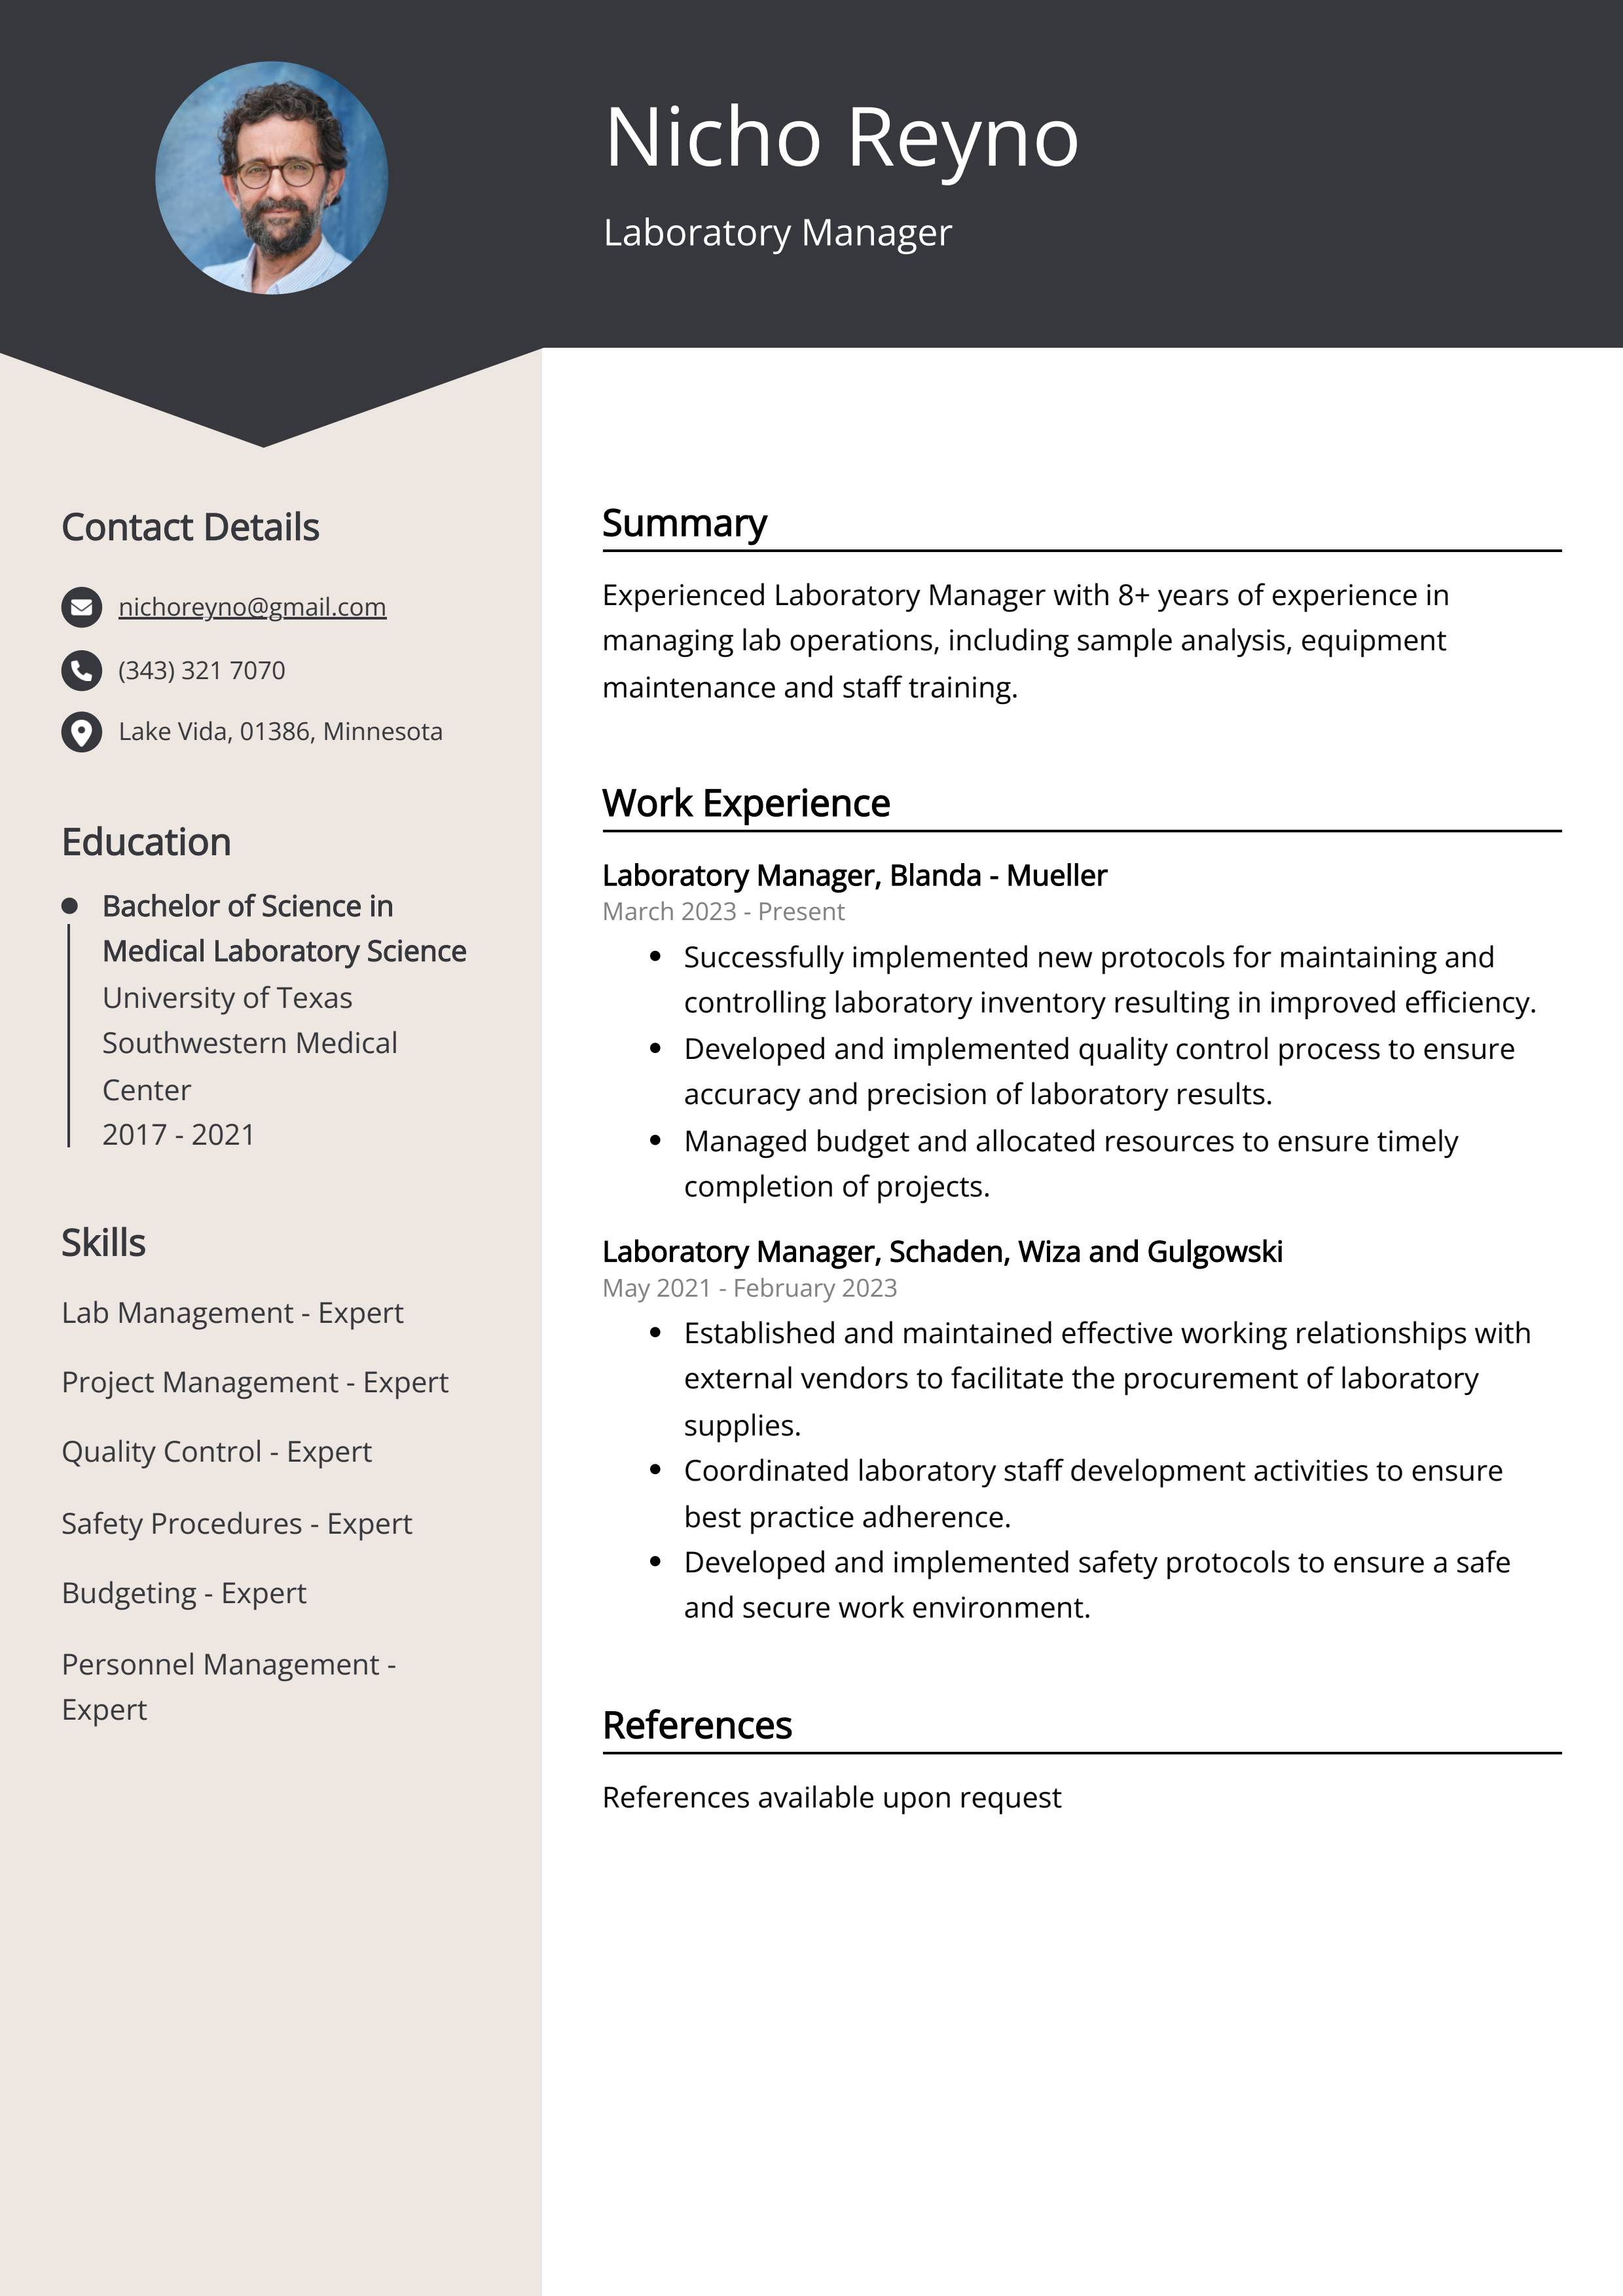 Laboratory Manager CV Example